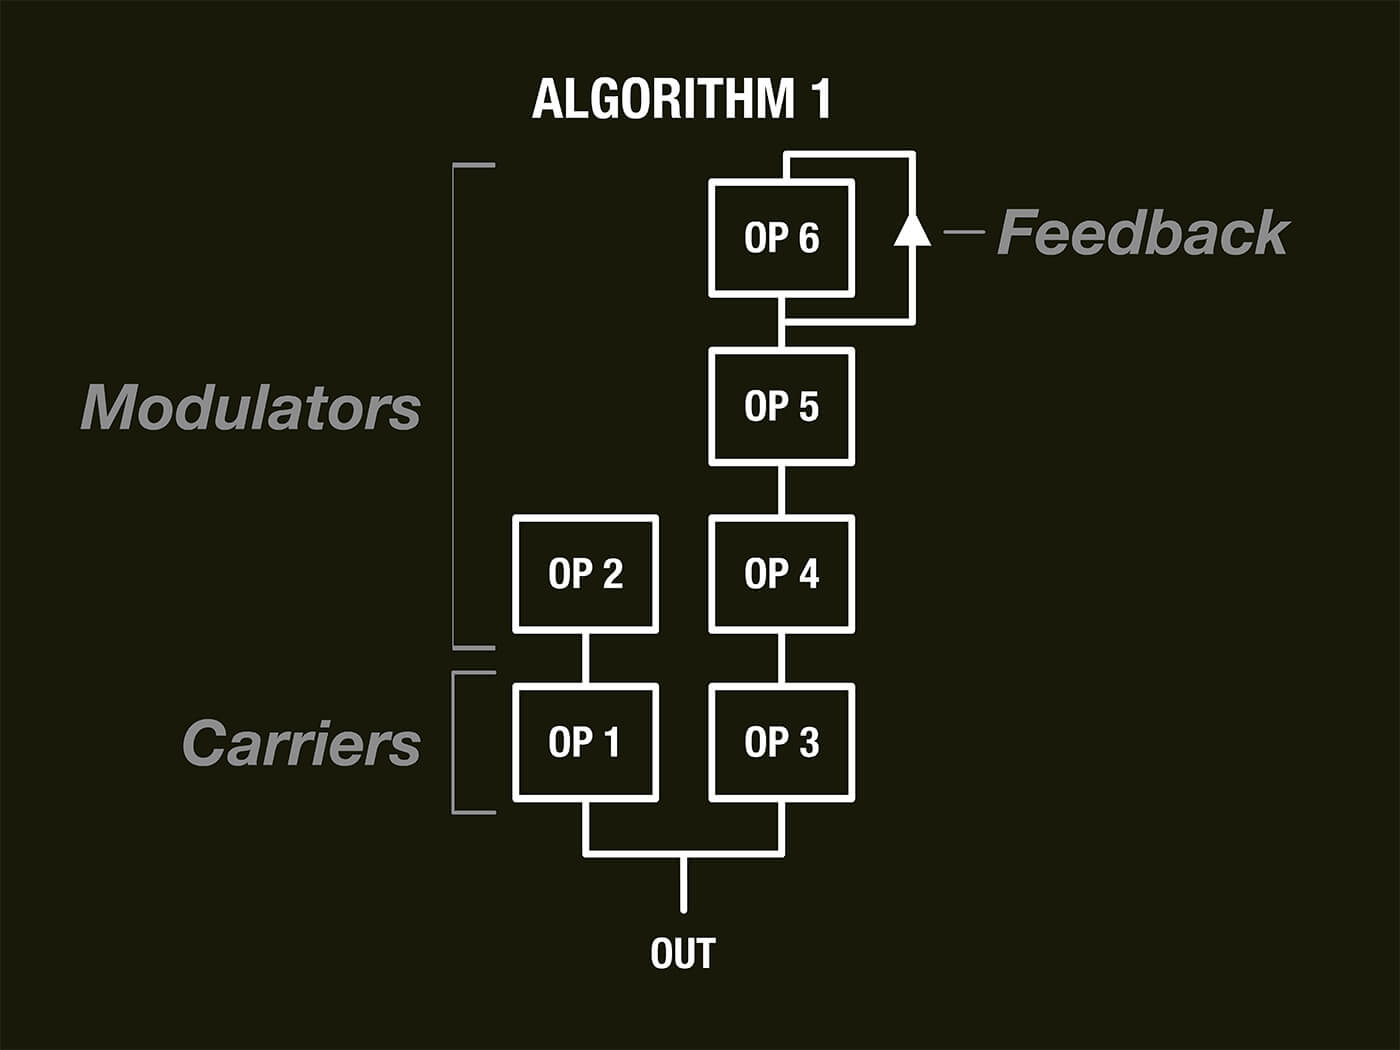 The structure of the DX7’s Algorithm 1 